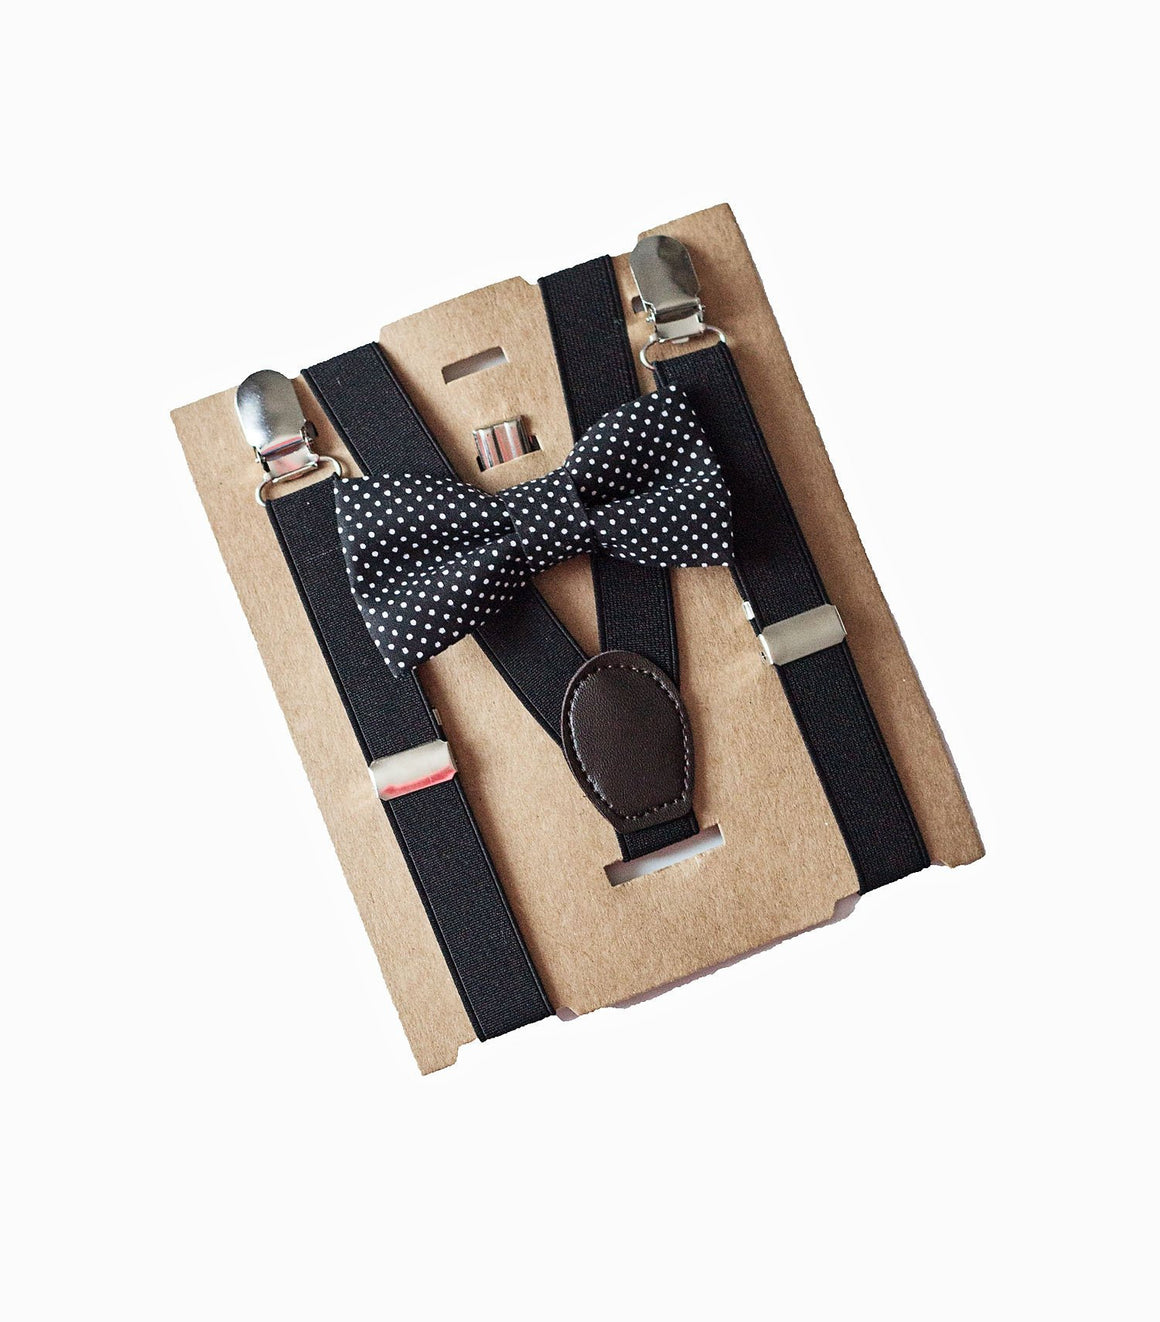 Black Bow Tie Suspenders - Infant To Adult Sizes